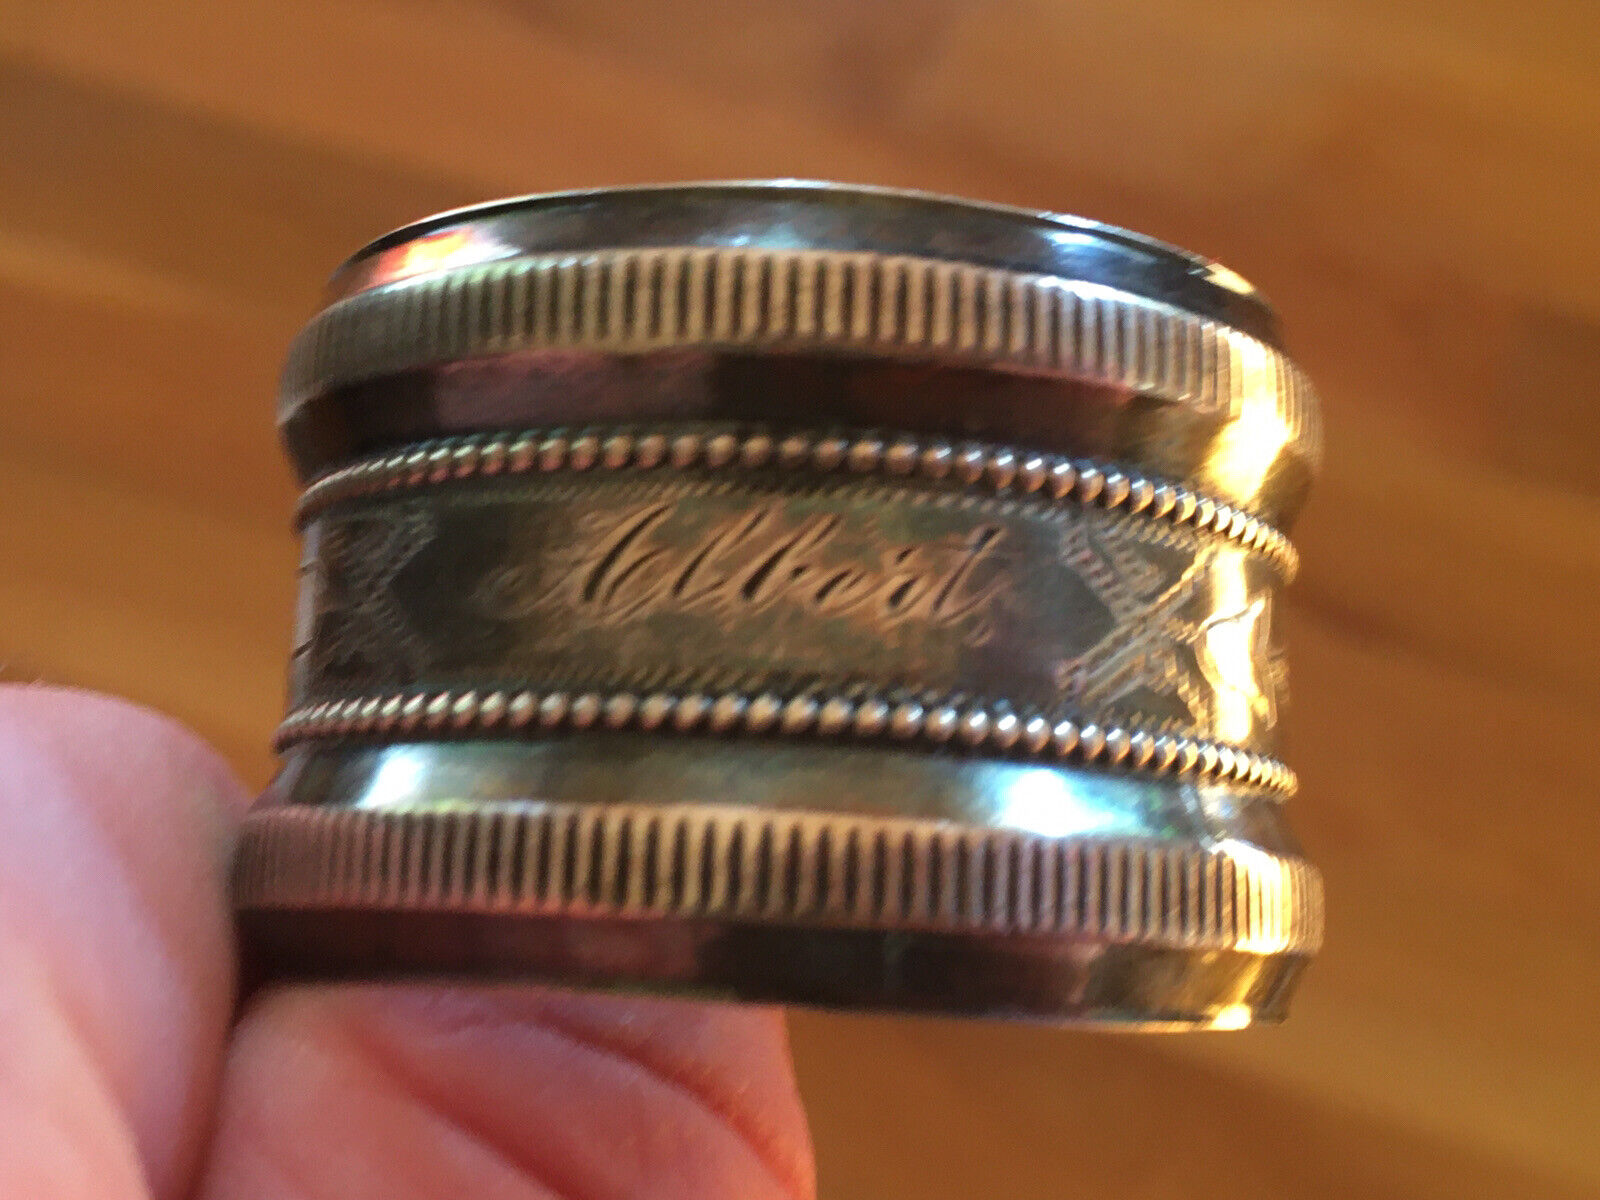 Antique Silverplated Or Possibly Silver Napkin Ring Vintage Engraved Albert